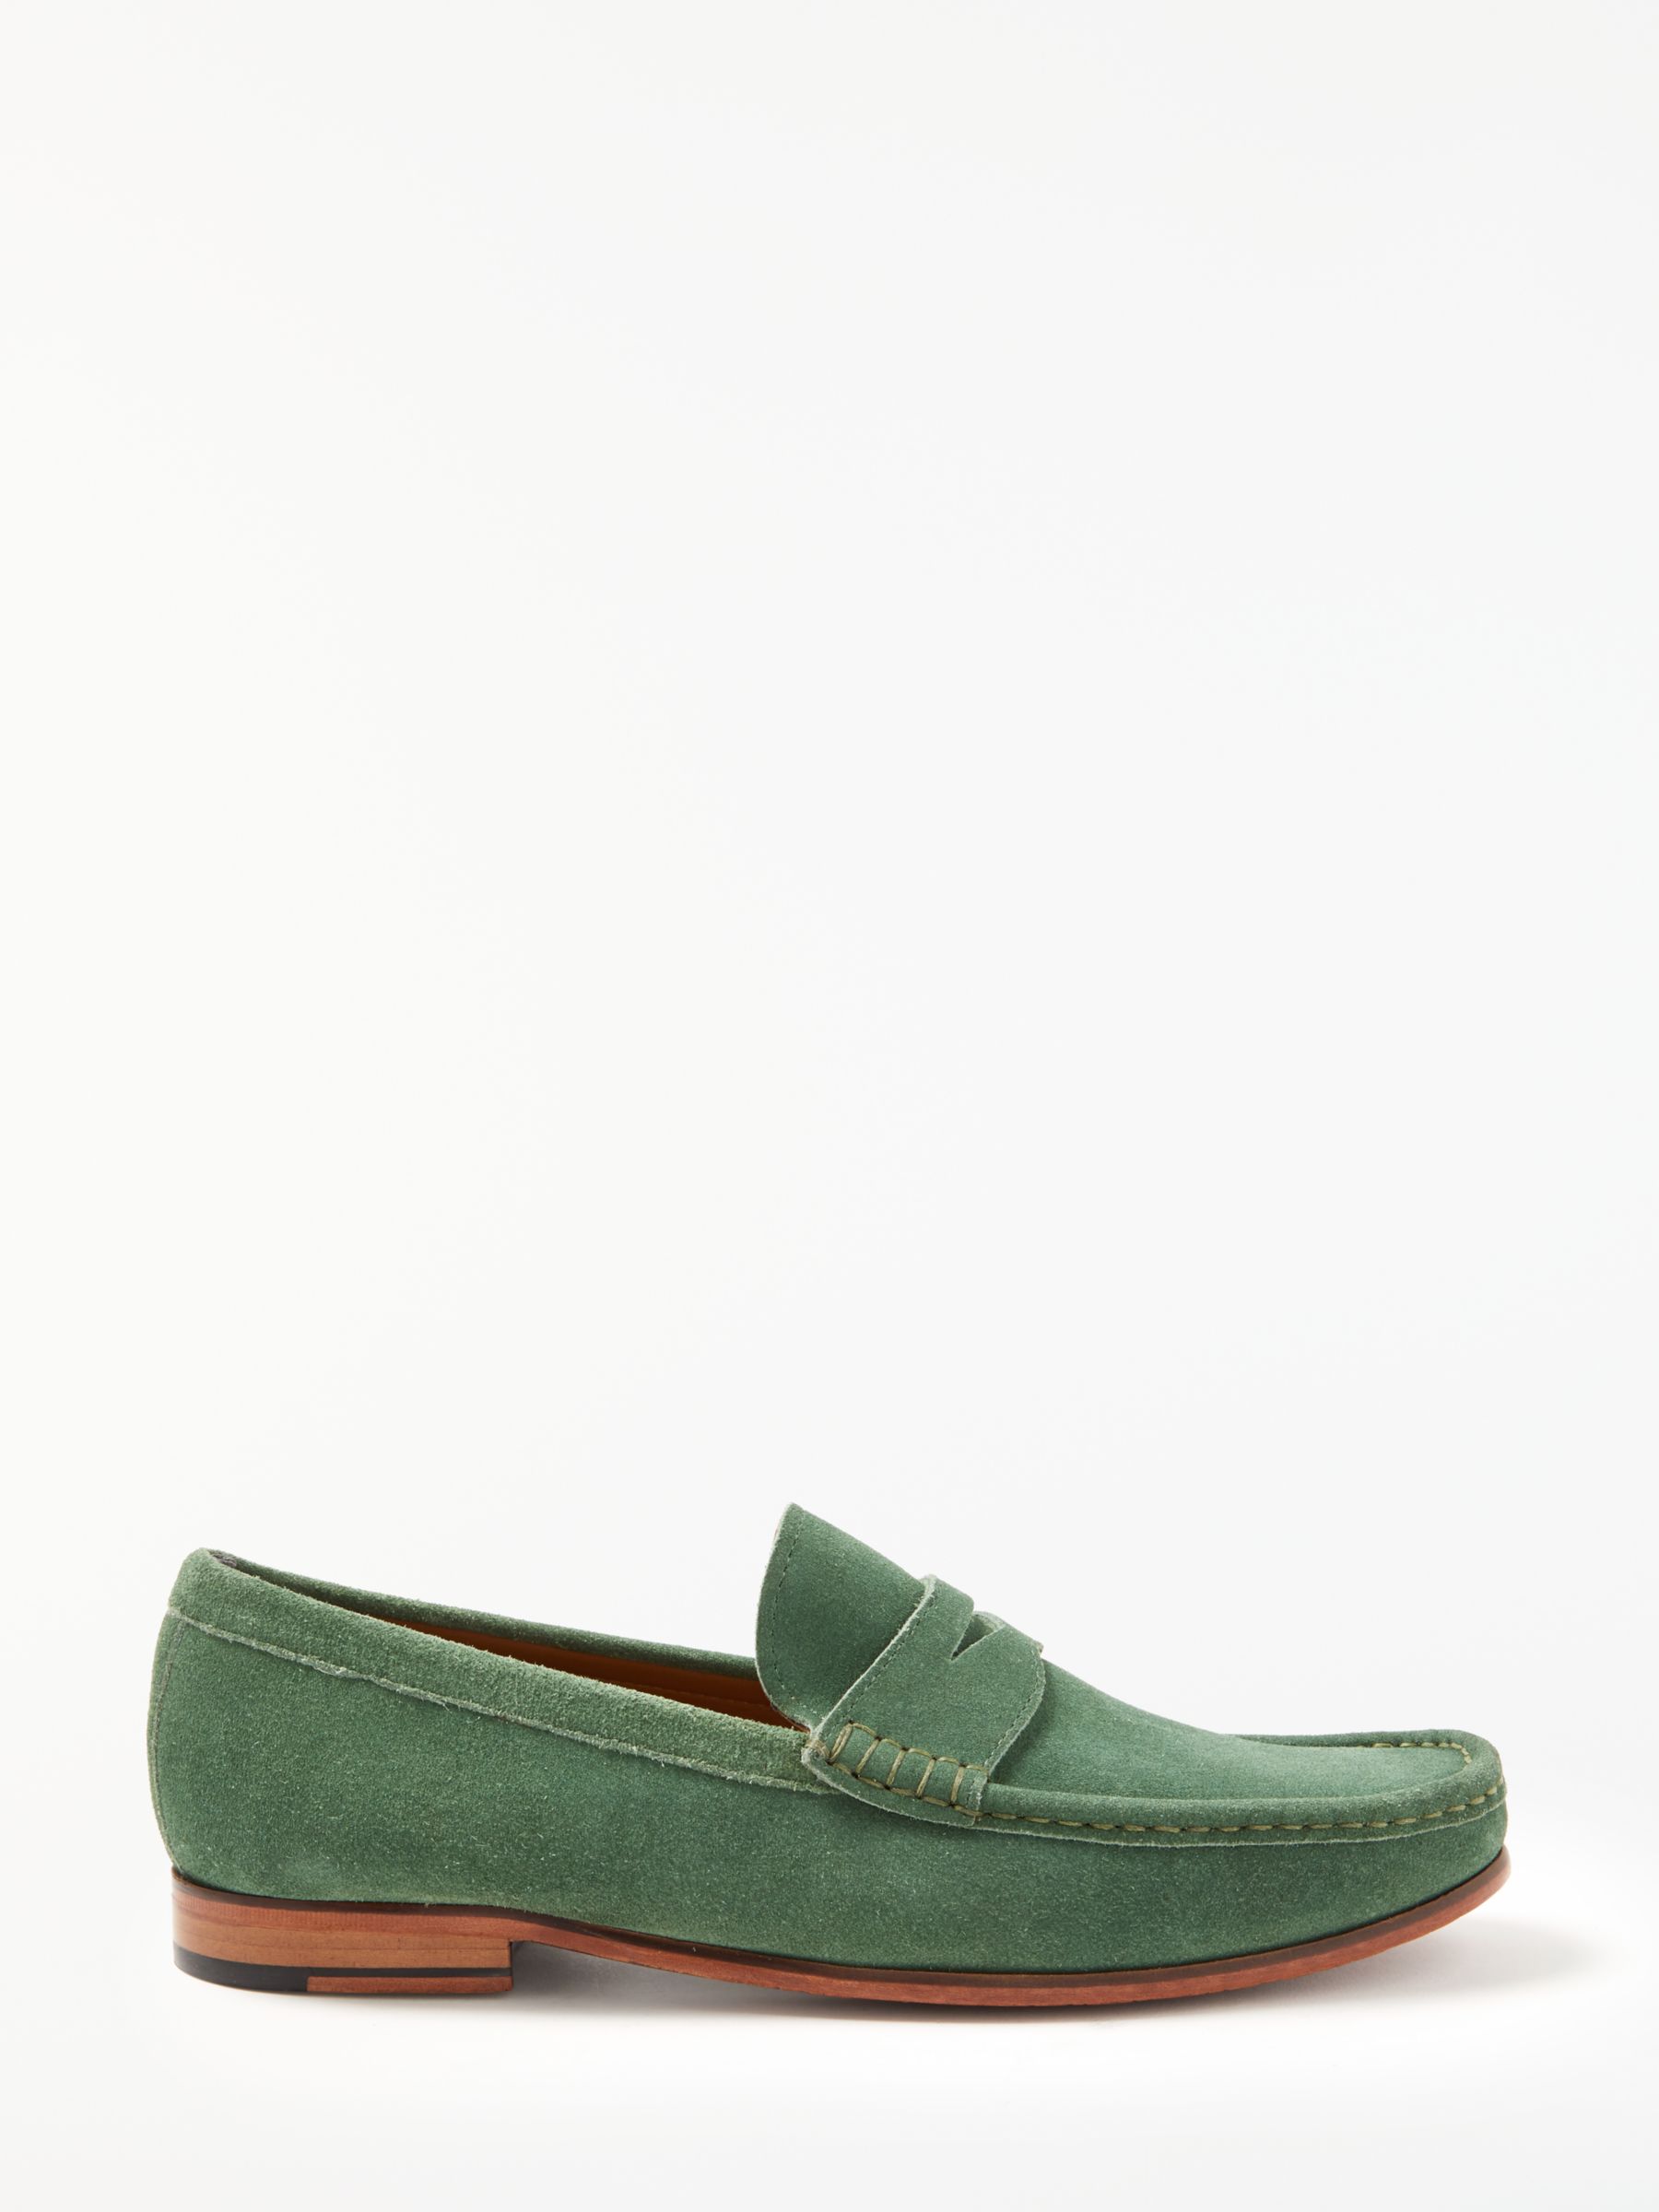 John Lewis & Partners Louis Suede Penny Loafers at John Lewis & Partners